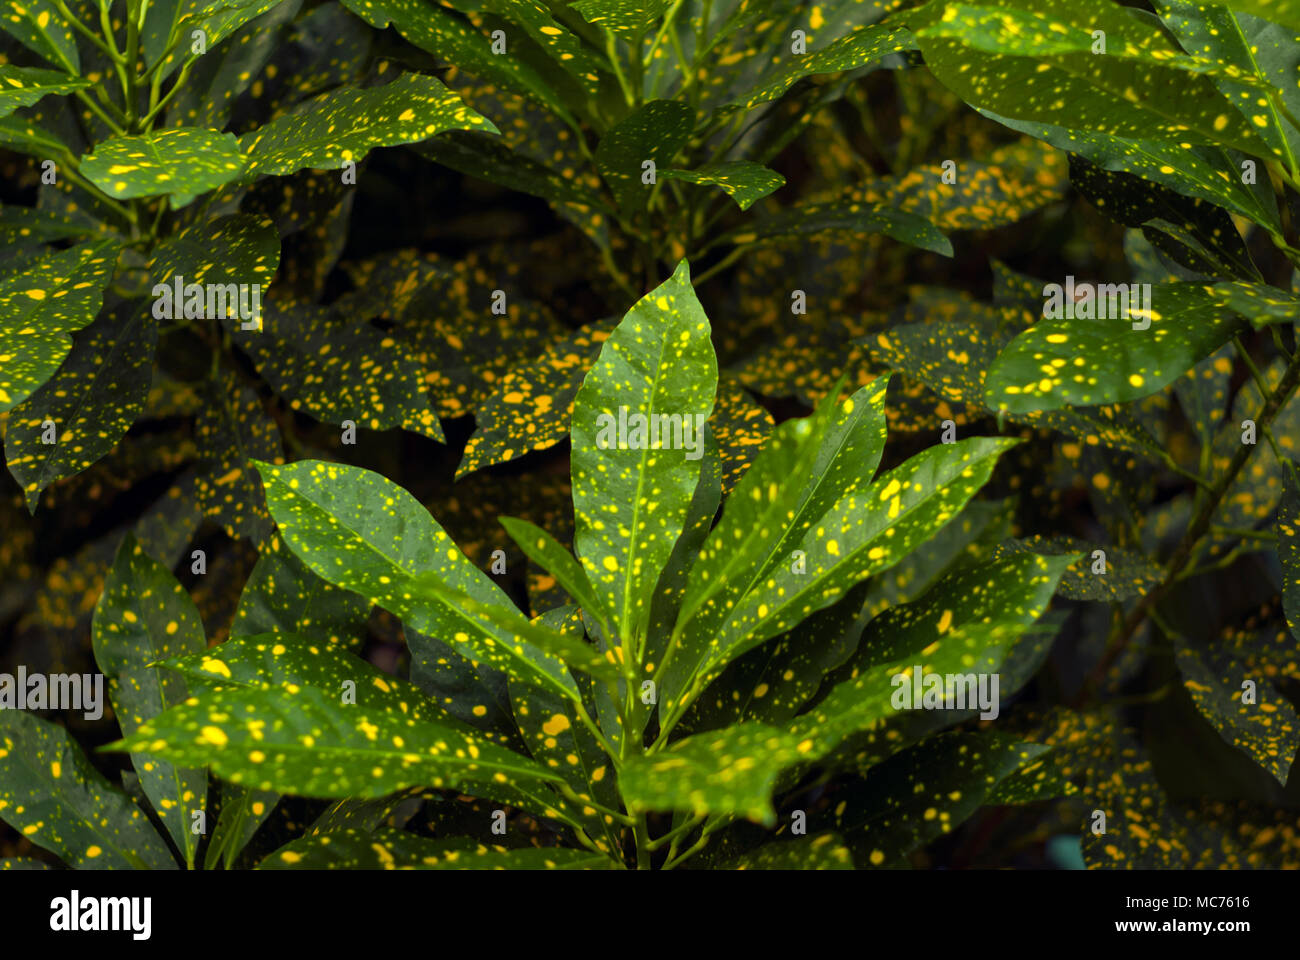 floral background - green in gold speckls leaves of Gold Dust Croton (Codiaeum variegatum, garden croton or variegated croton) Stock Photo